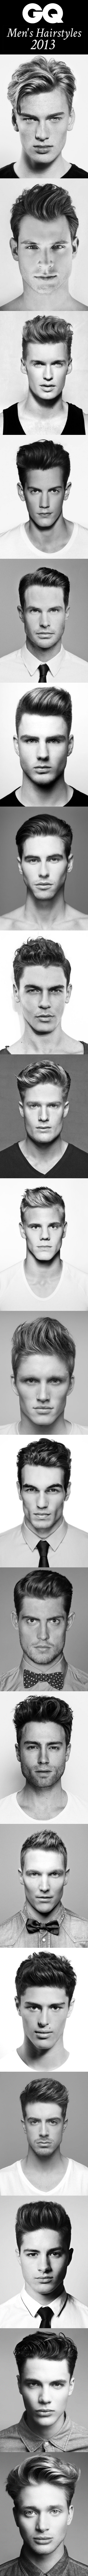 mens hairstyle 2013